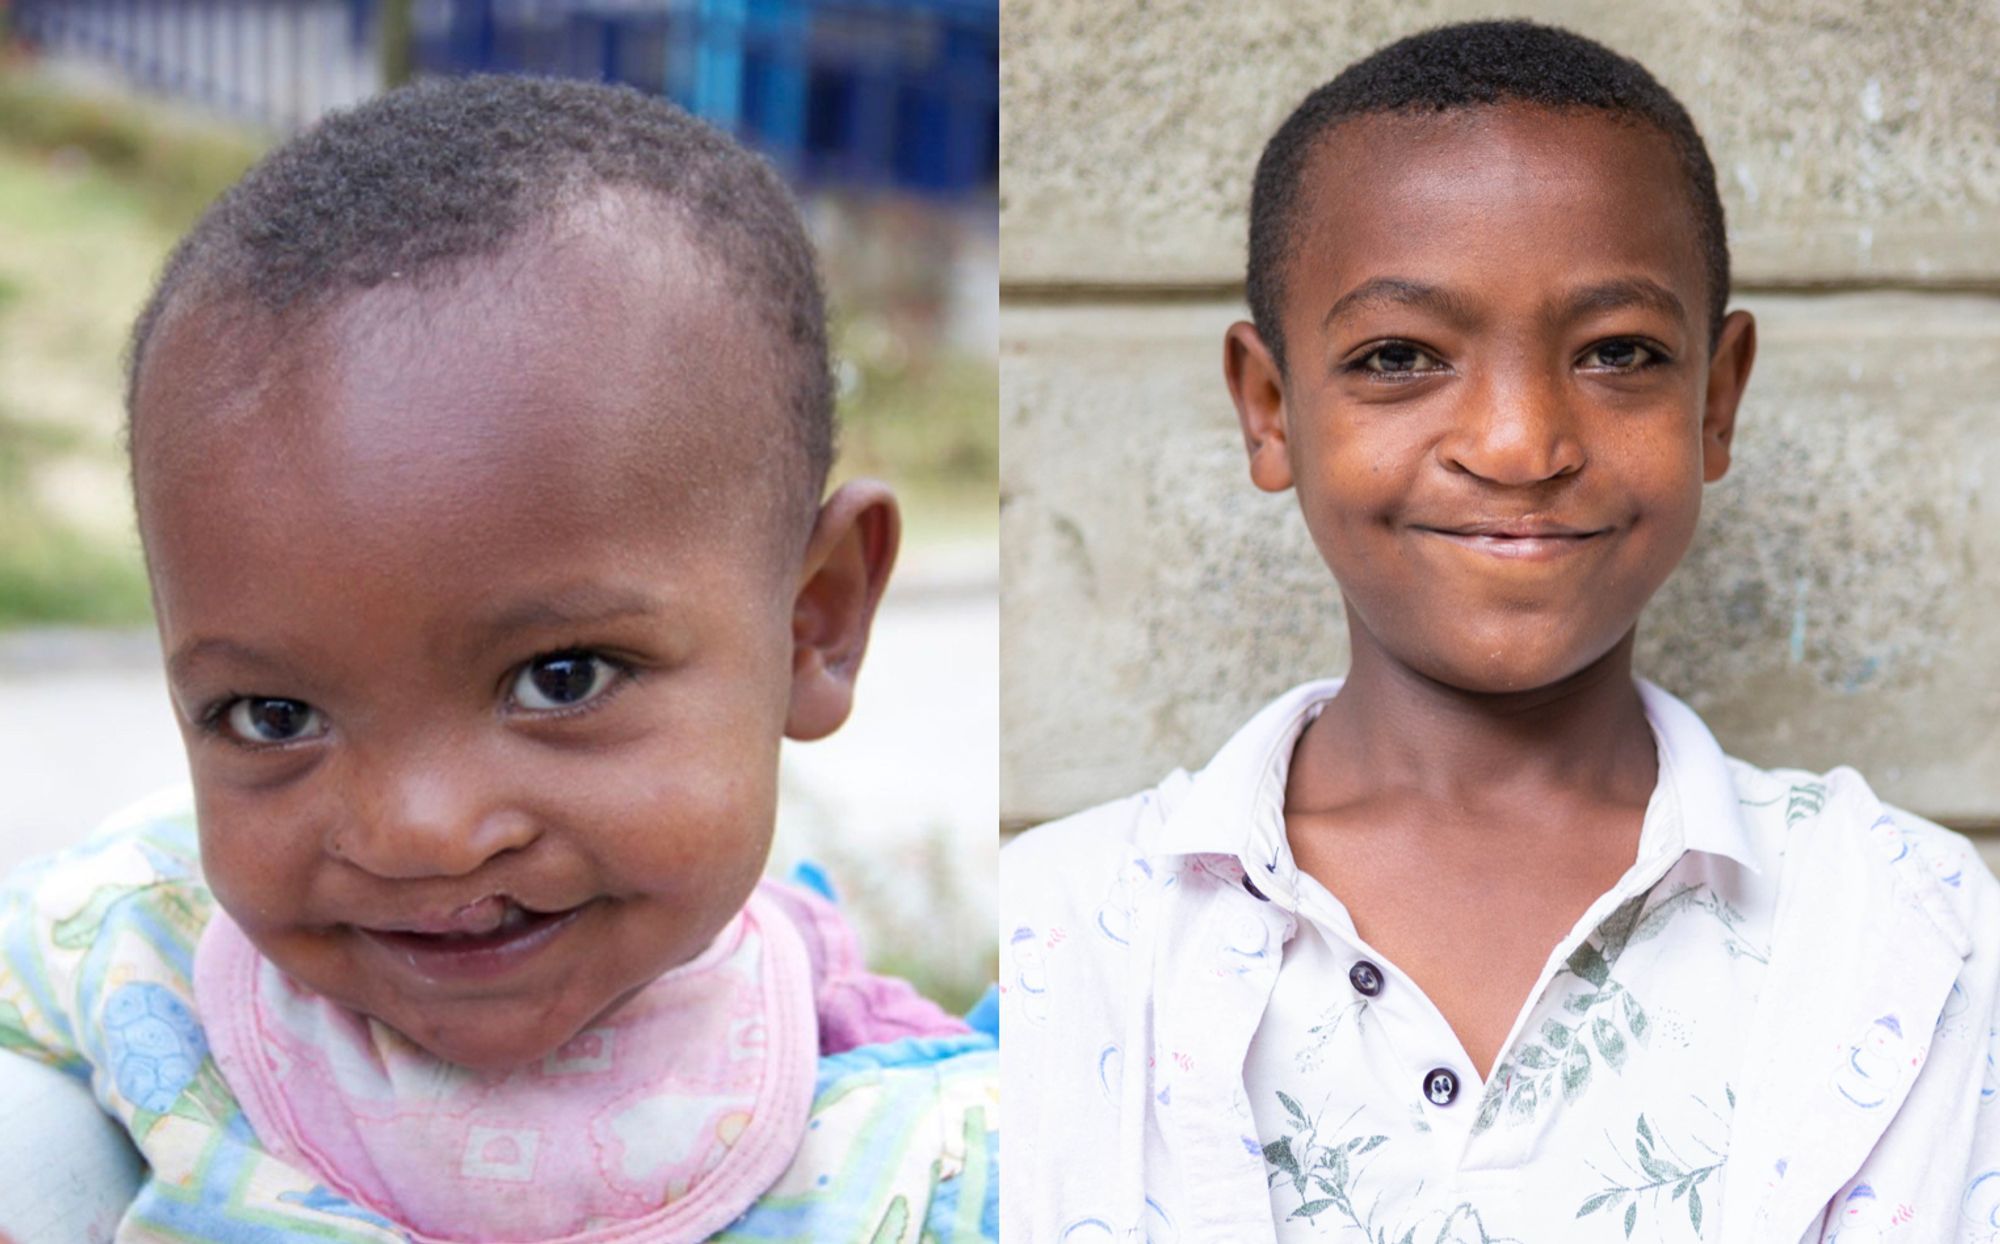 child with cleft lip, before and after